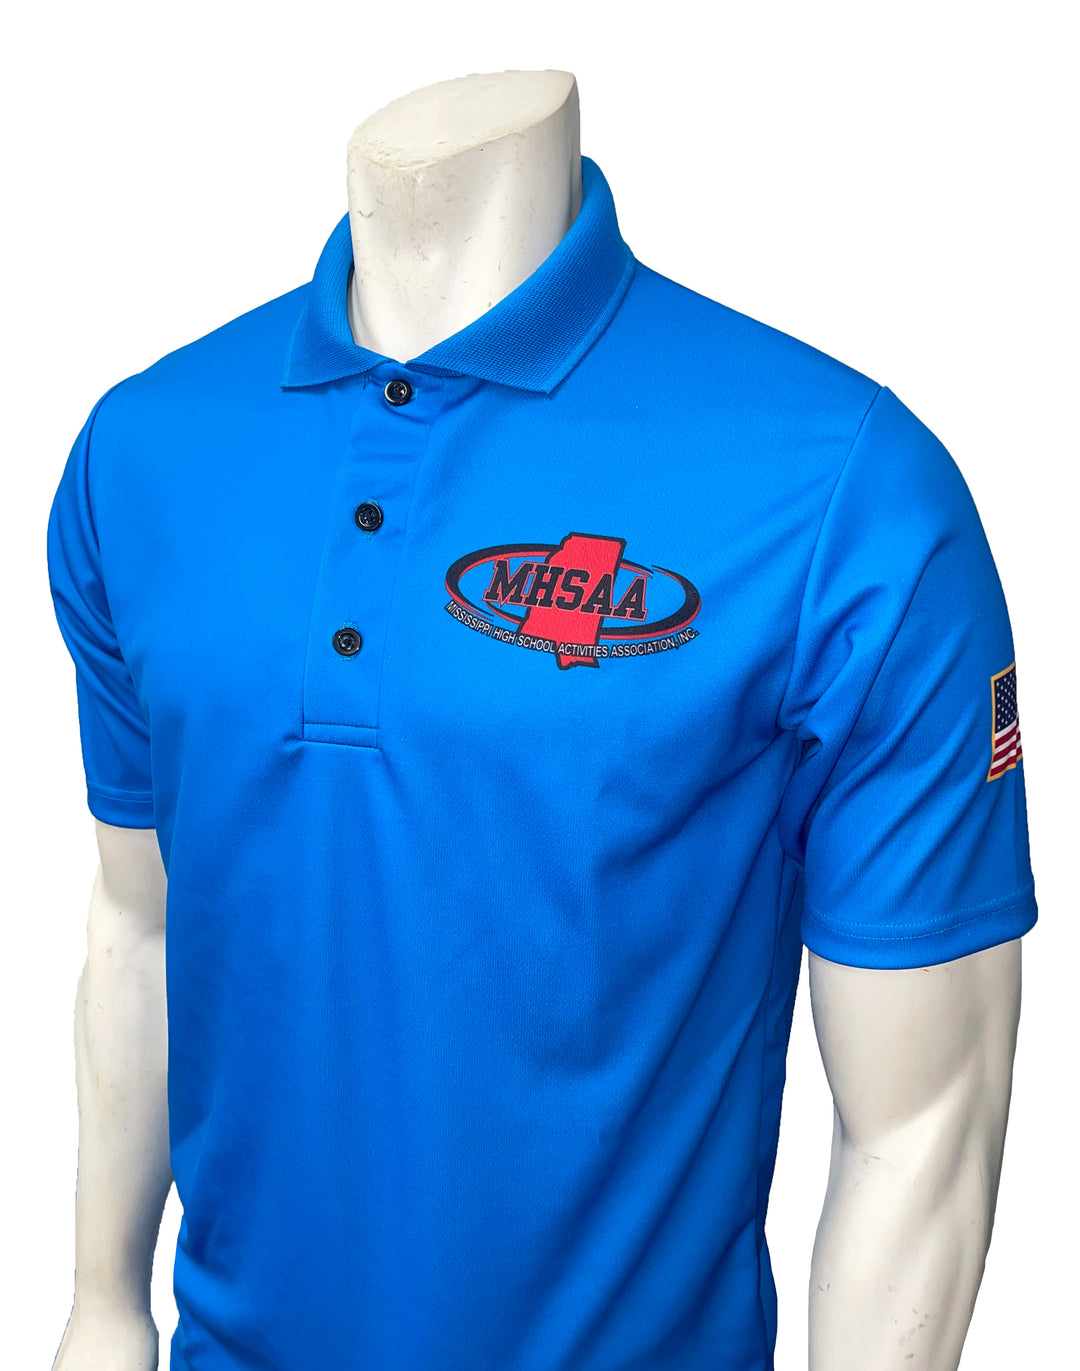 USA480MS-BB - Smitty "Made in USA" - Mississippi Volleyball "BRIGHT BLUE" Short Sleeve Shirt